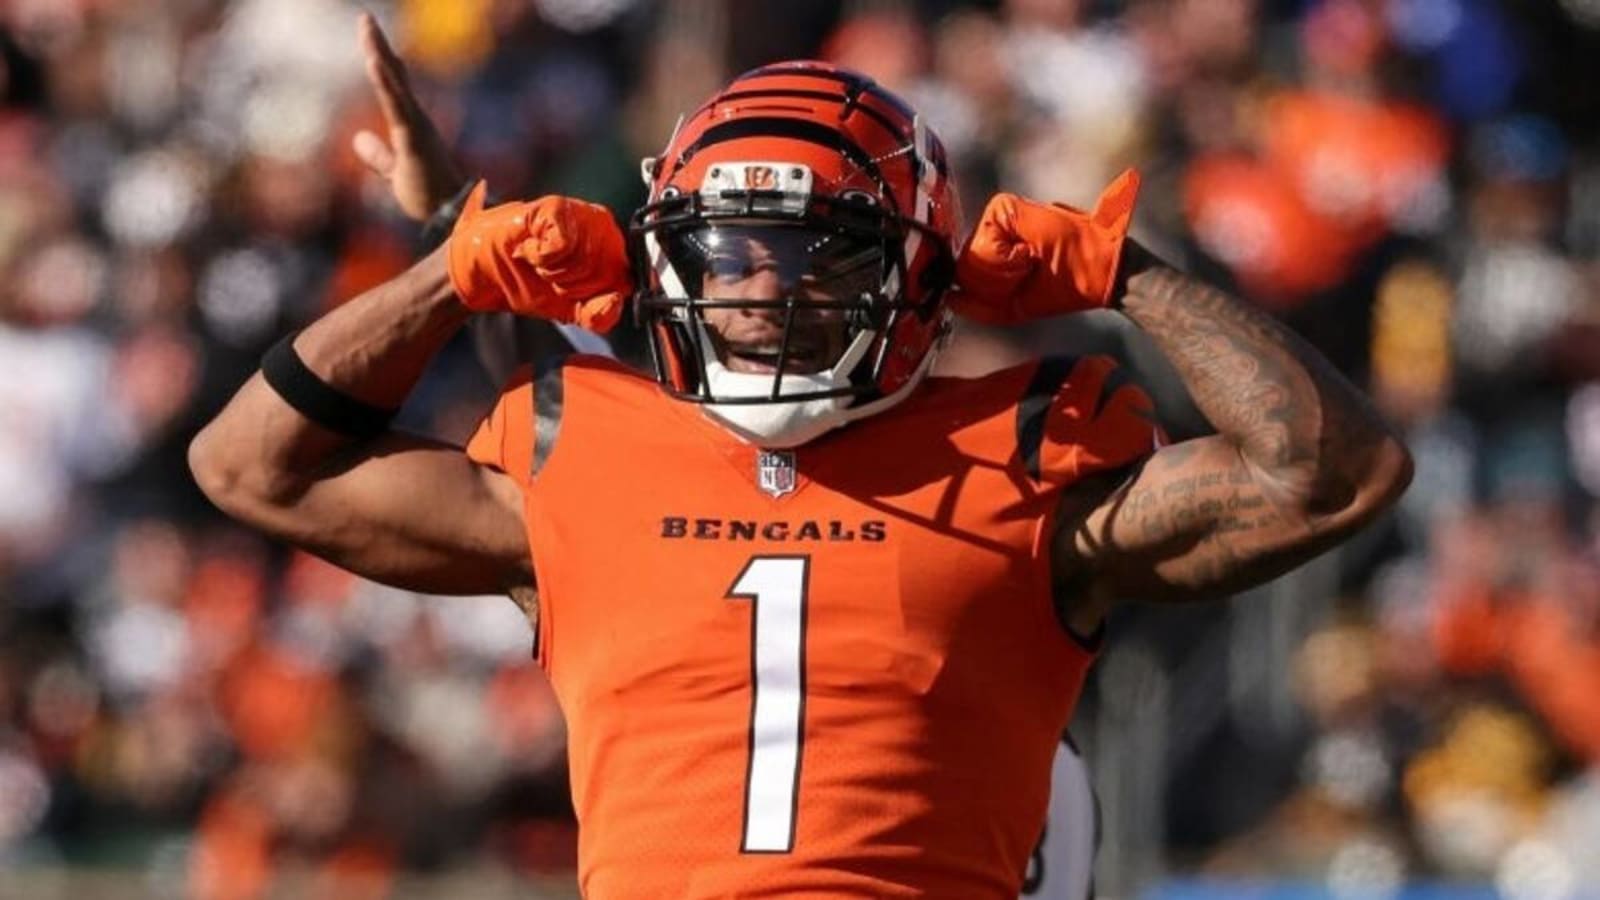 $1 million Super Bowl bet placed on Bengals at STL area casino